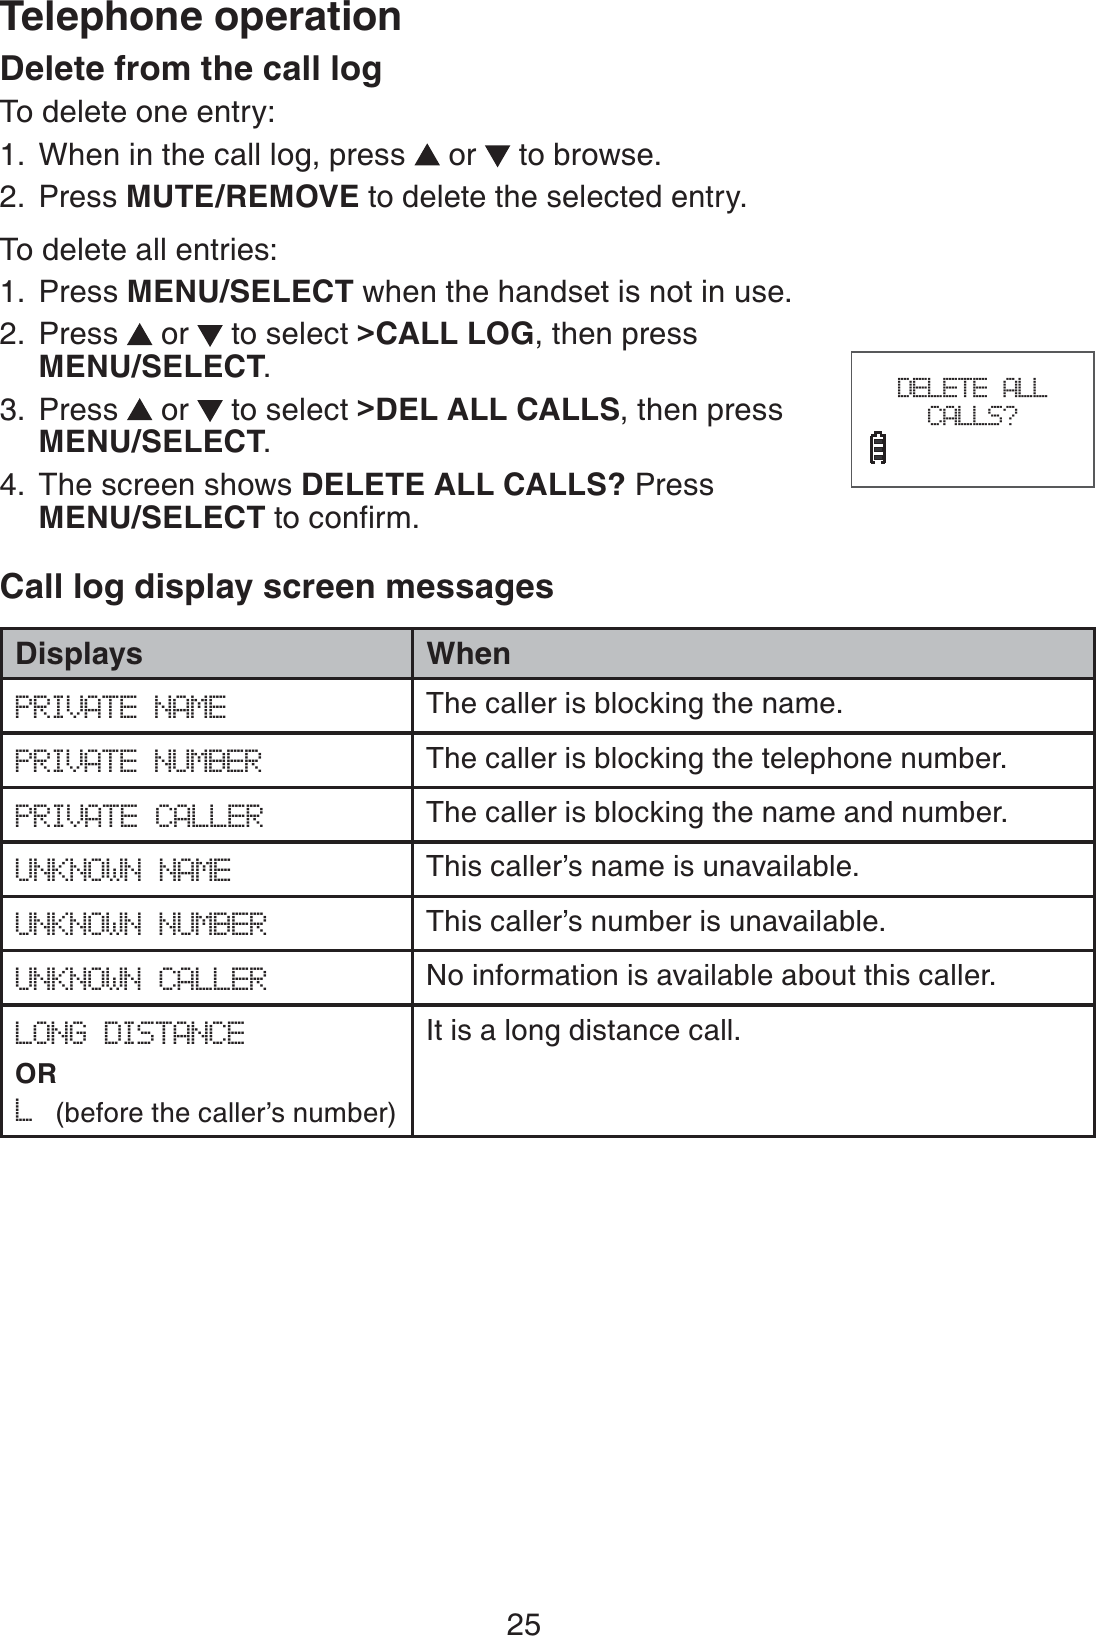 25Telephone operationDelete from the call logTo delete one entry:When in the call log, press   or   to browse.Press MUTE/REMOVE to delete the selected entry.To delete all entries:Press MENU/SELECT when the handset is not in use.Press   or   to select &gt;CALL LOG, then press  MENU/SELECT.Press   or   to select &gt;DEL ALL CALLS, then press MENU/SELECT.The screen shows DELETE ALL CALLS? Press  MENU/SELECT to confirm.Call log display screen messages1.2.1.2.3.4.Displays WhenPRIVATE NAME The caller is blocking the name.PRIVATE NUMBER The caller is blocking the telephone number.PRIVATE CALLER The caller is blocking the name and number. UNKNOWN NAME  This caller’s name is unavailable. UNKNOWN NUMBER  This caller’s number is unavailable.UNKNOWN CALLER No information is available about this caller.LONG DISTANCEOR L (before the caller’s number)  It is a long distance call.DELETE ALL CALLS?